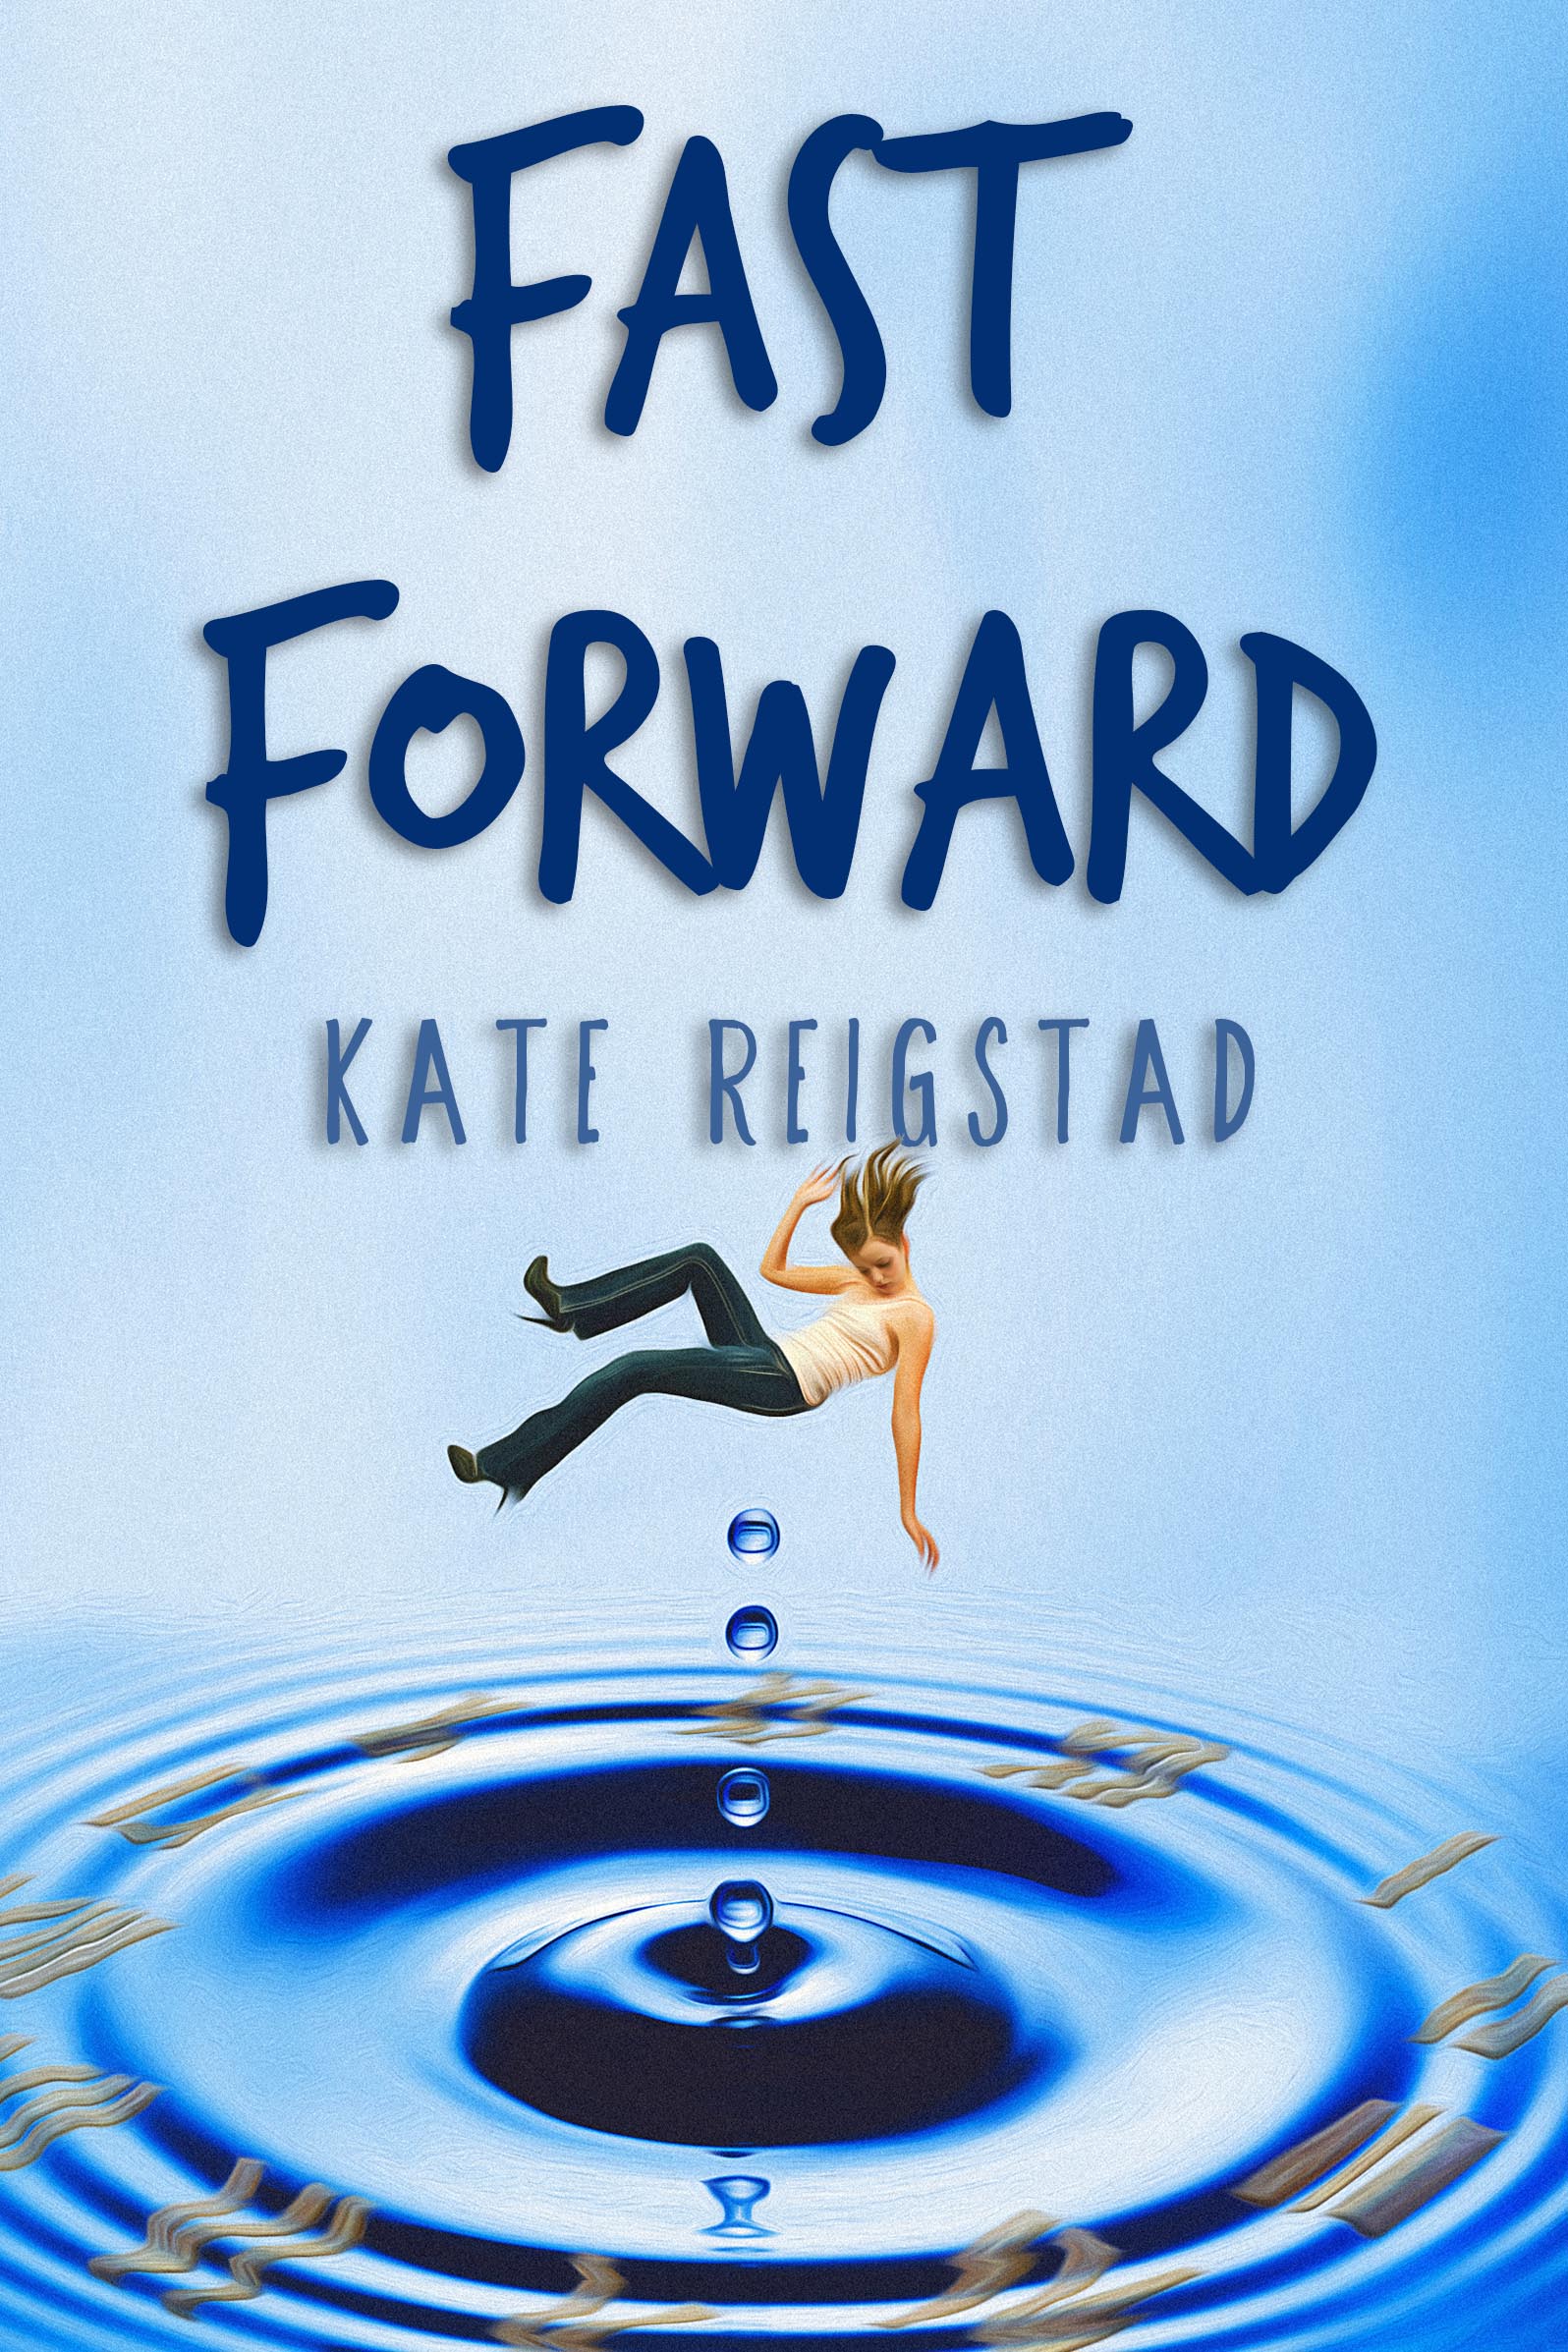 Fast Forward by Kate Reigstad